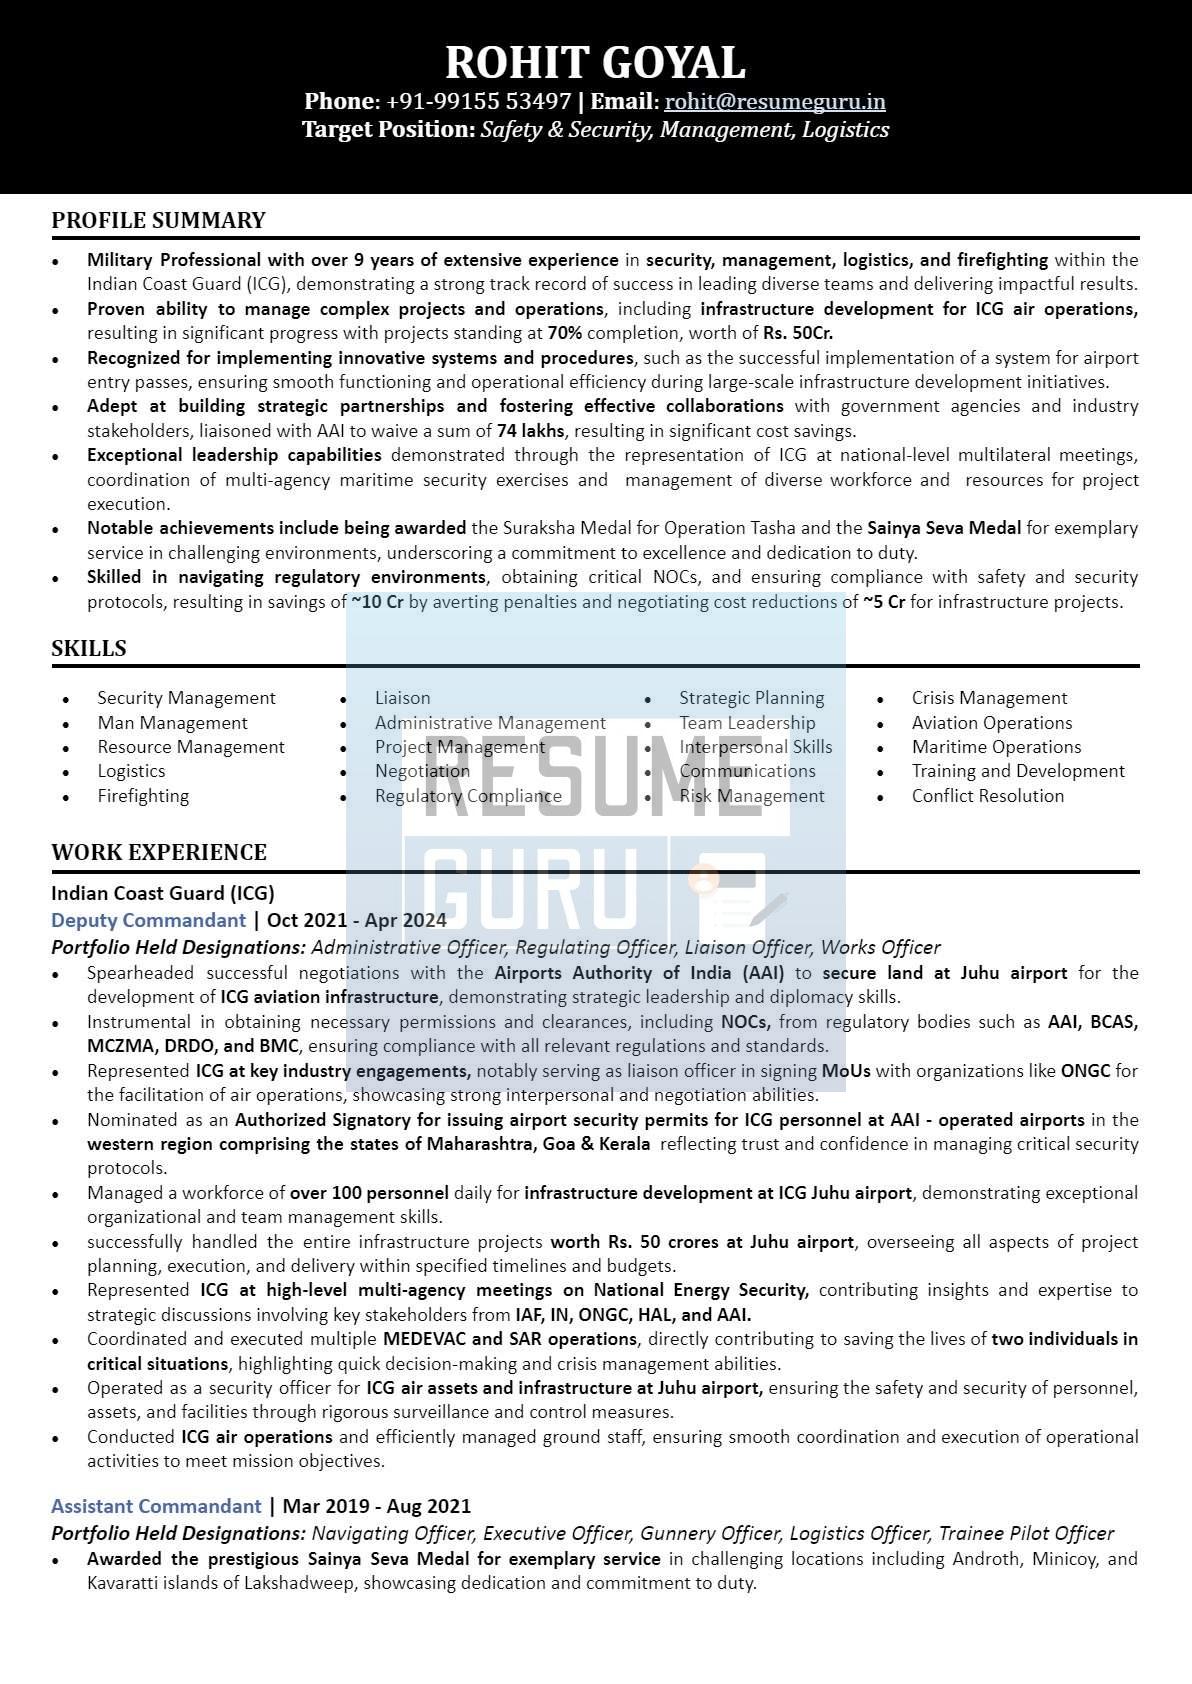 Mid-Level Military Professional seeking transfer to Corporate_1